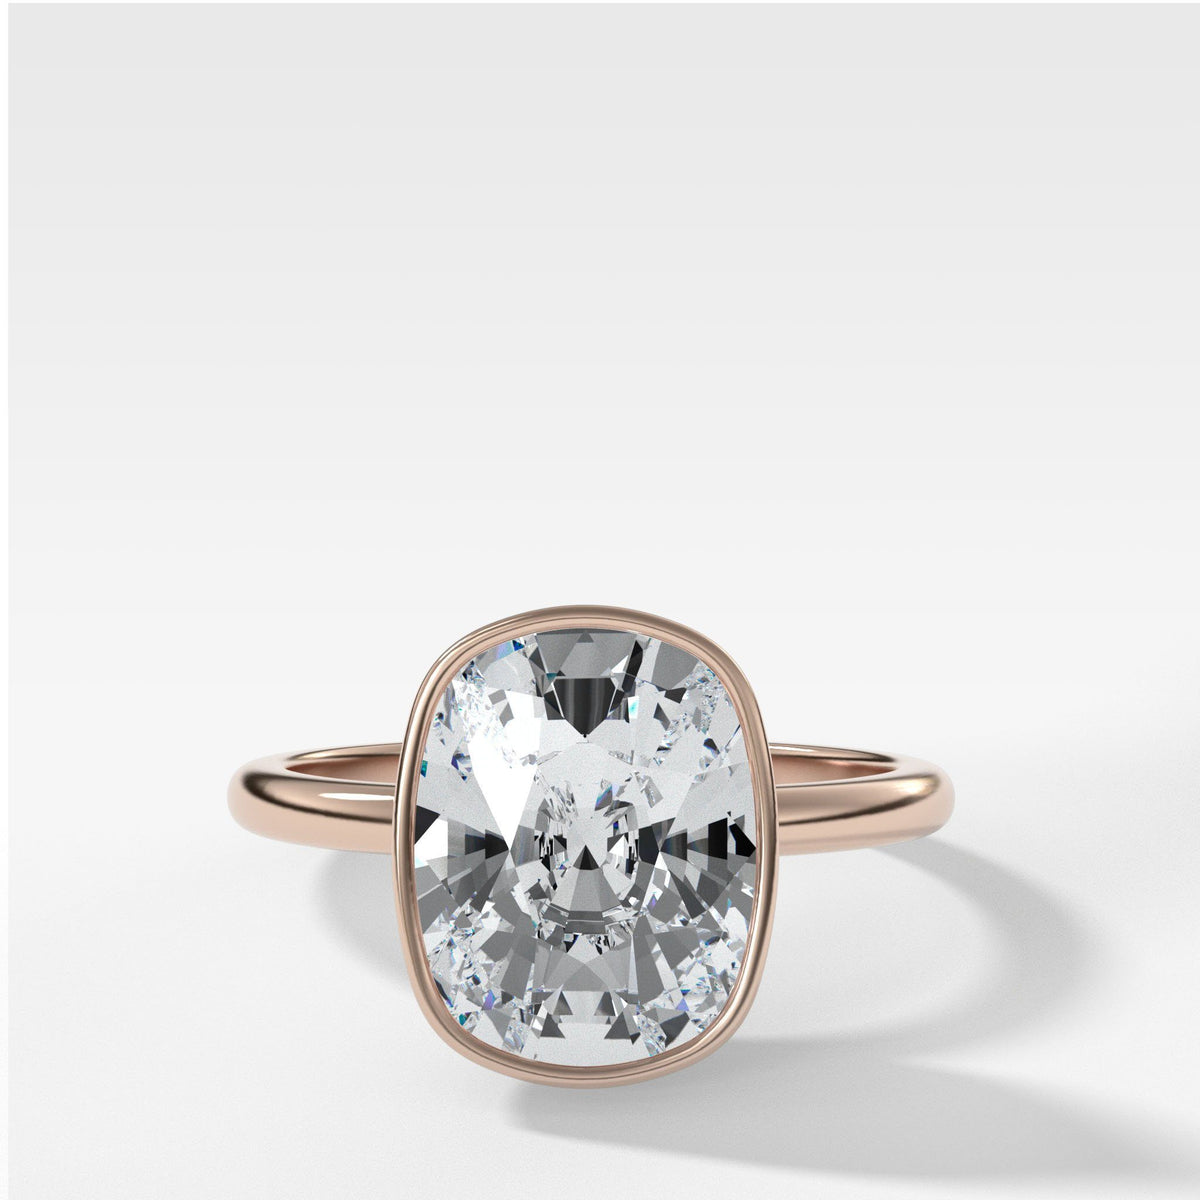 Bezel Penumbra Solitaire With Elongated Cushion Cut by Good Stone in Rose Gold